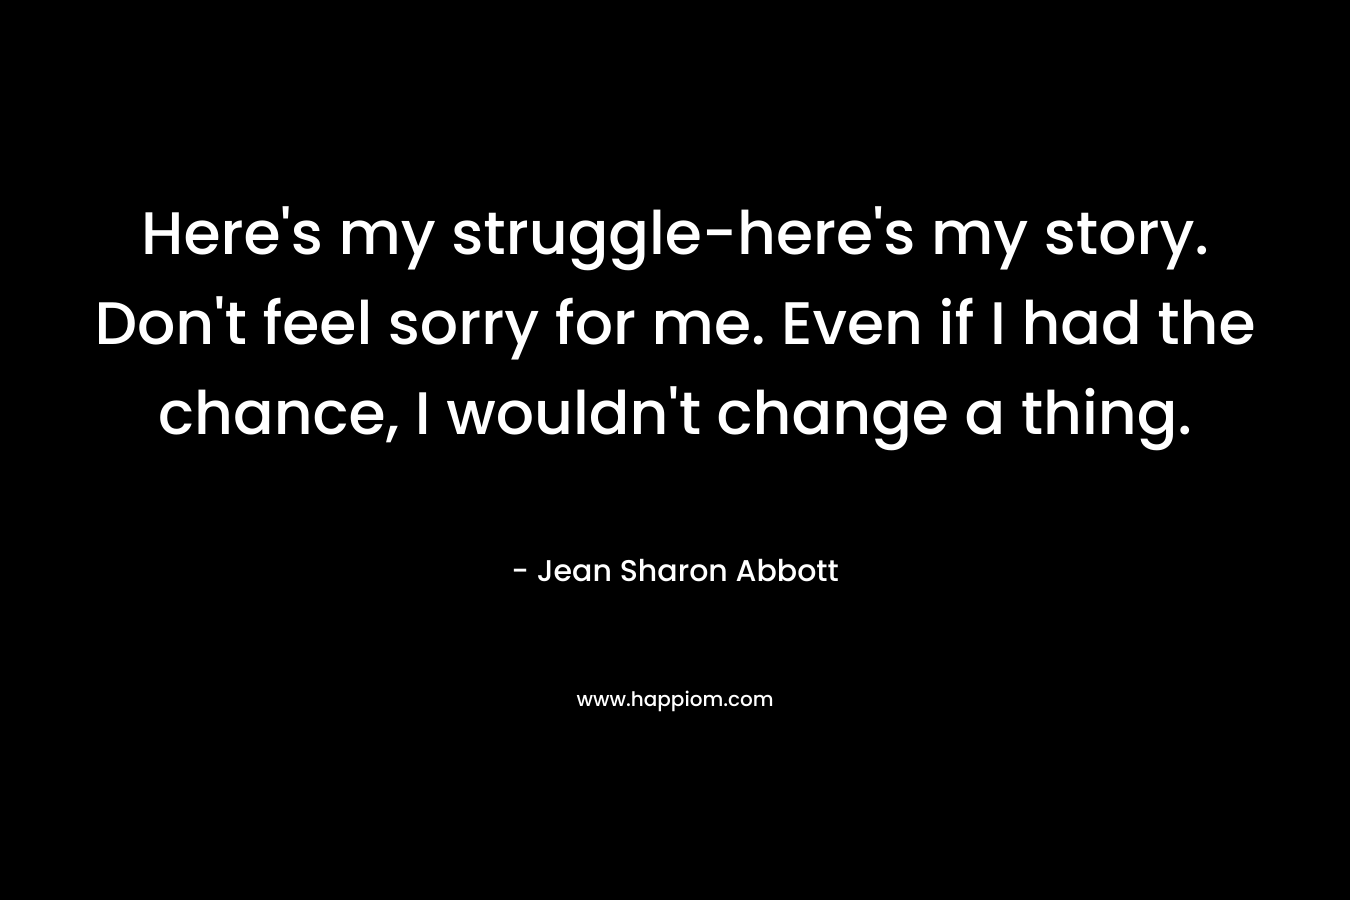 Here's my struggle-here's my story. Don't feel sorry for me. Even if I had the chance, I wouldn't change a thing.